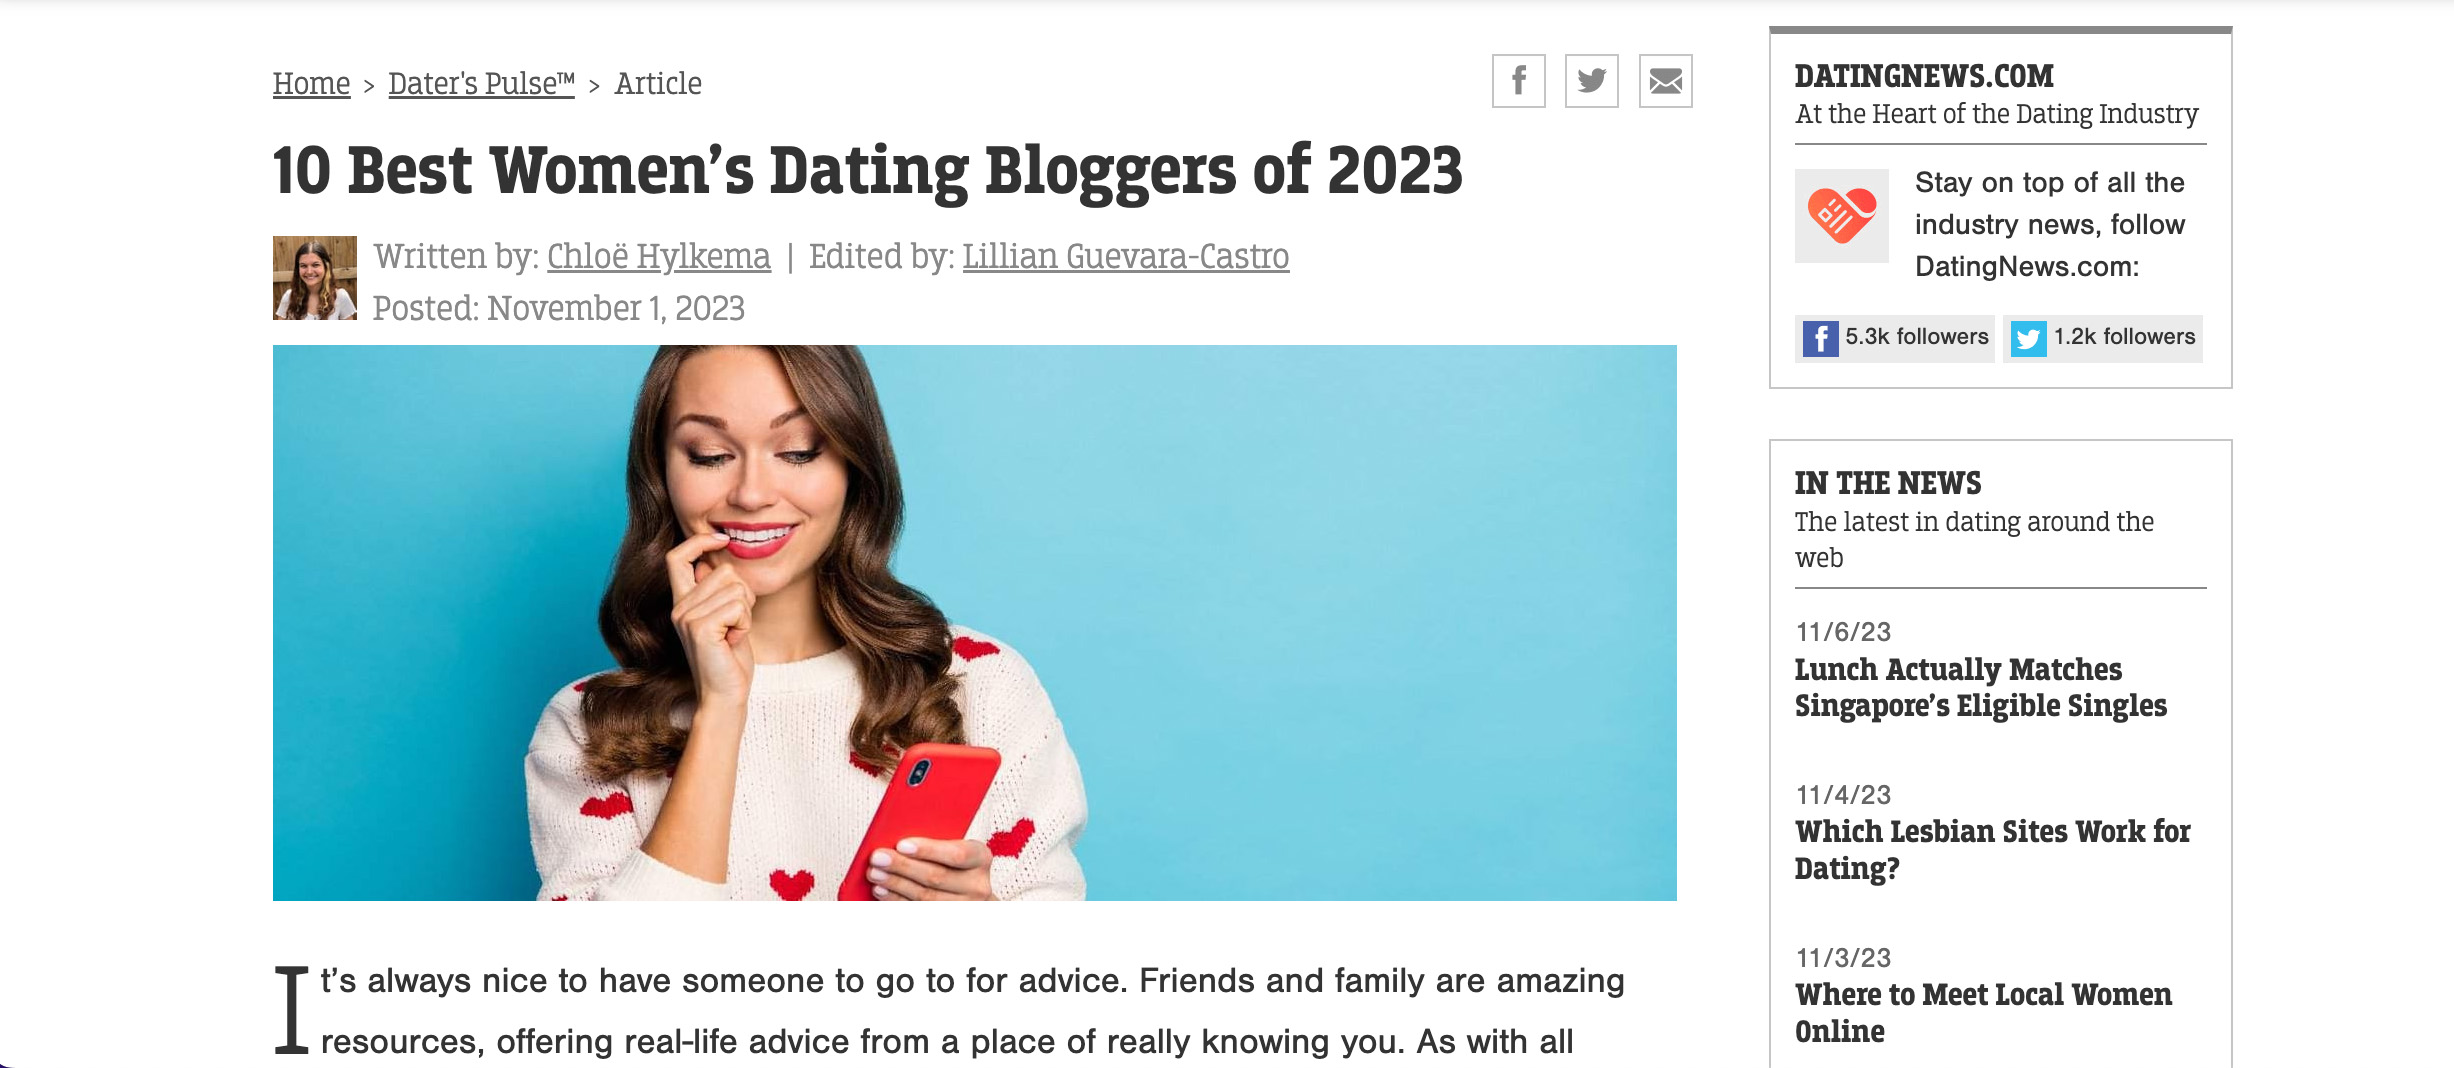 The Greatest Courting Bloggers for Ladies